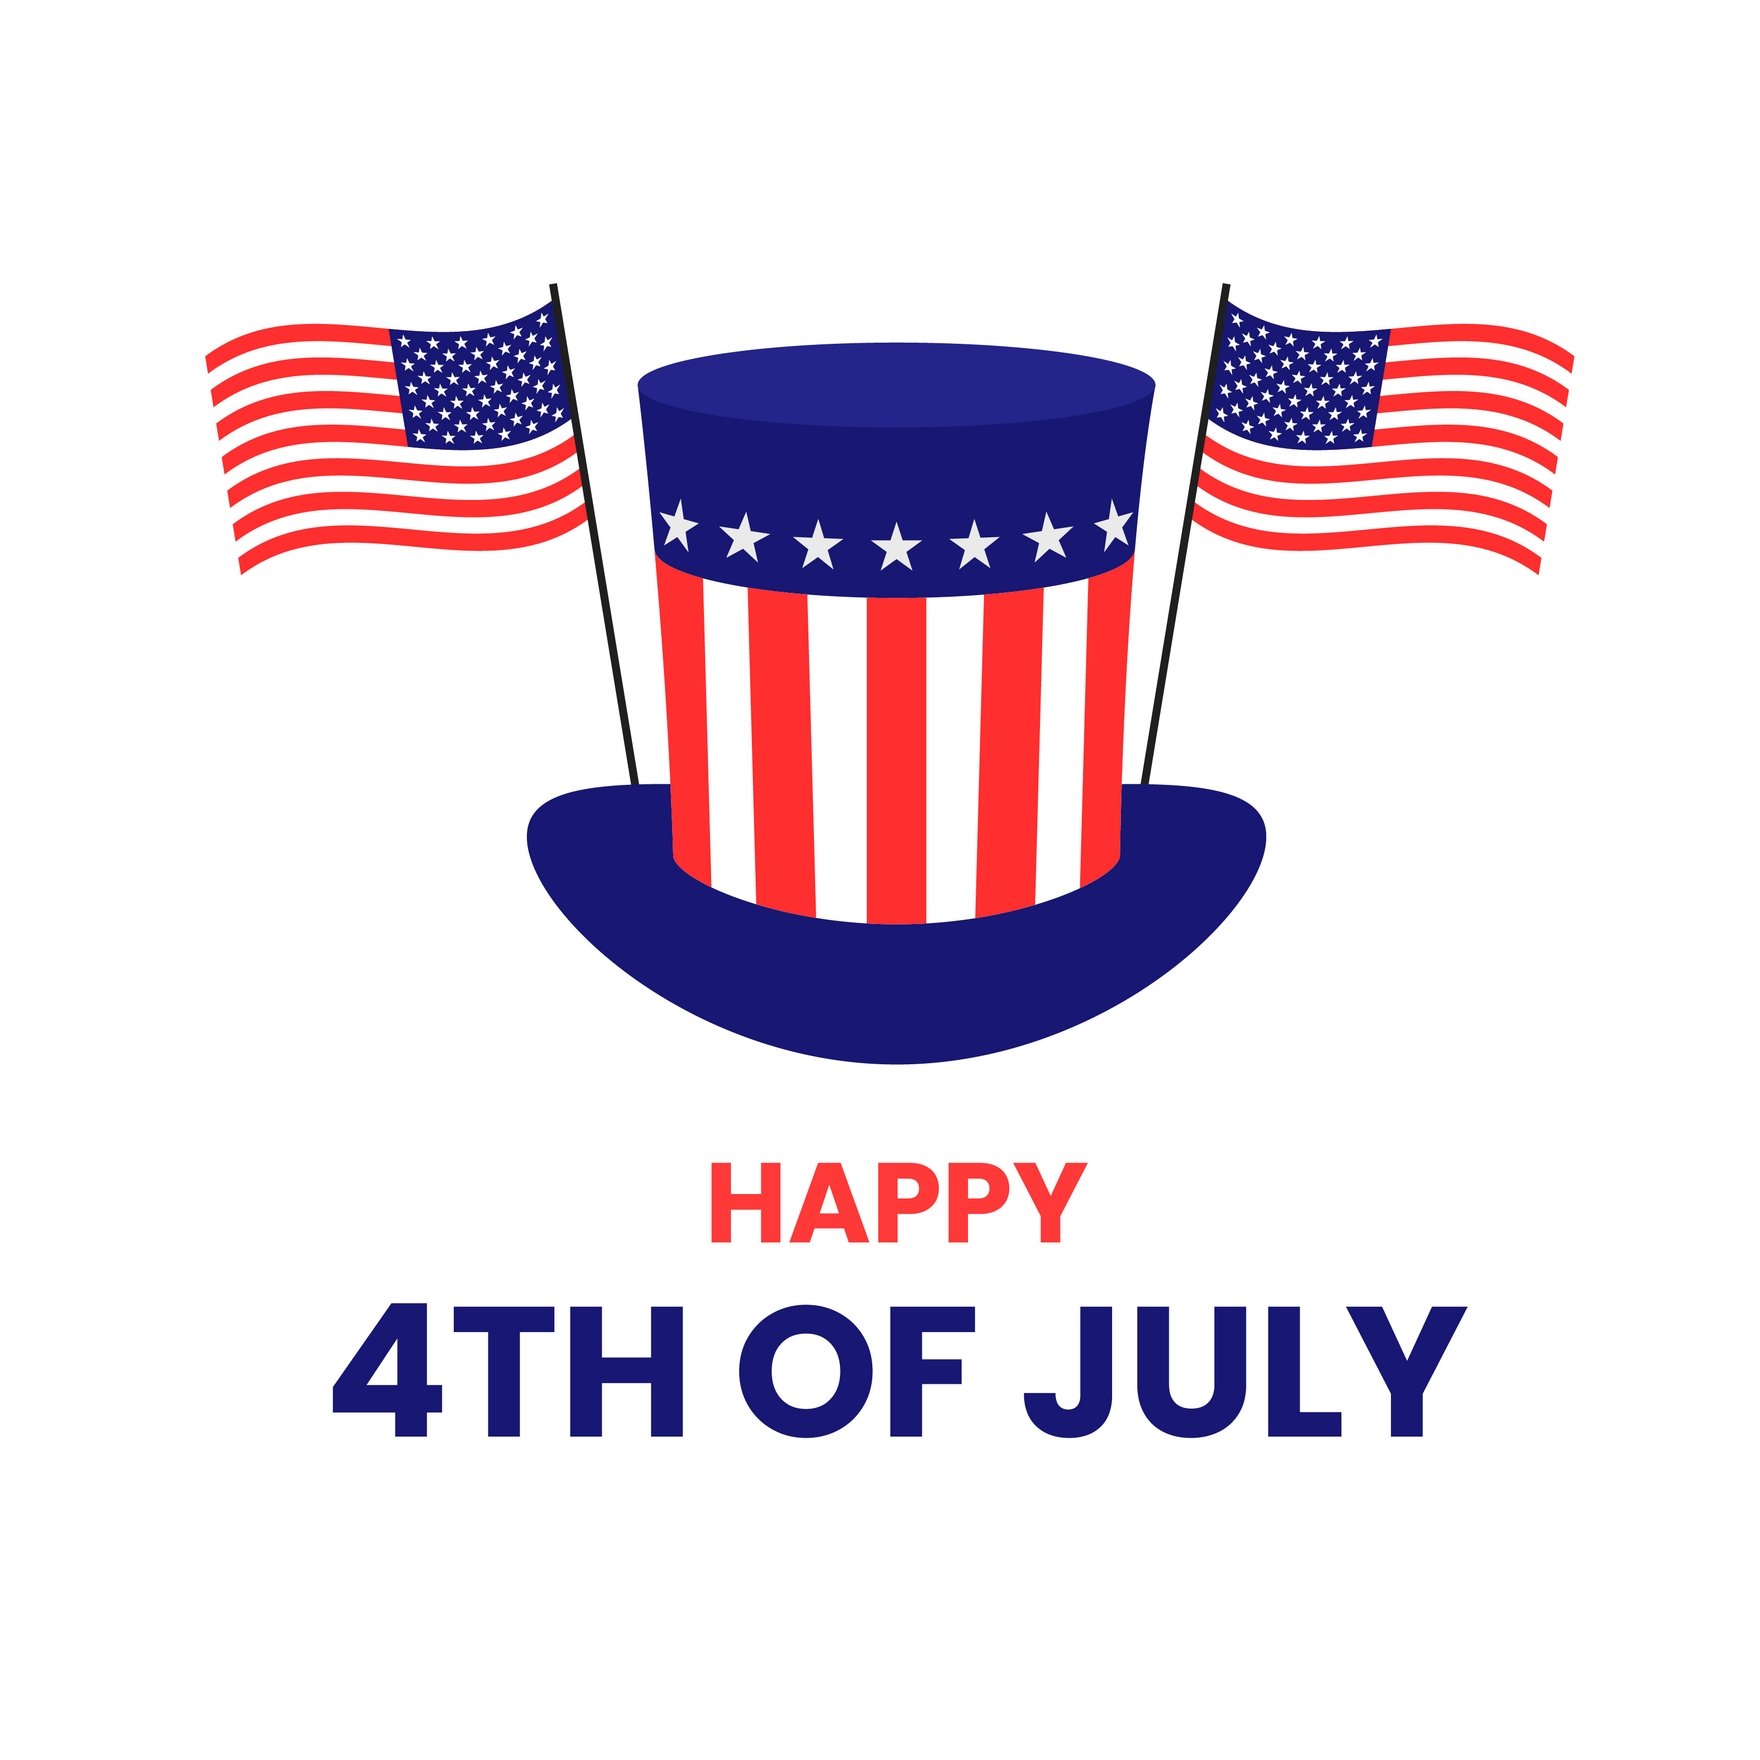 Free Happy 4th Of July Gif in Illustrator, EPS, SVG, JPG, GIF, PNG, After Effects